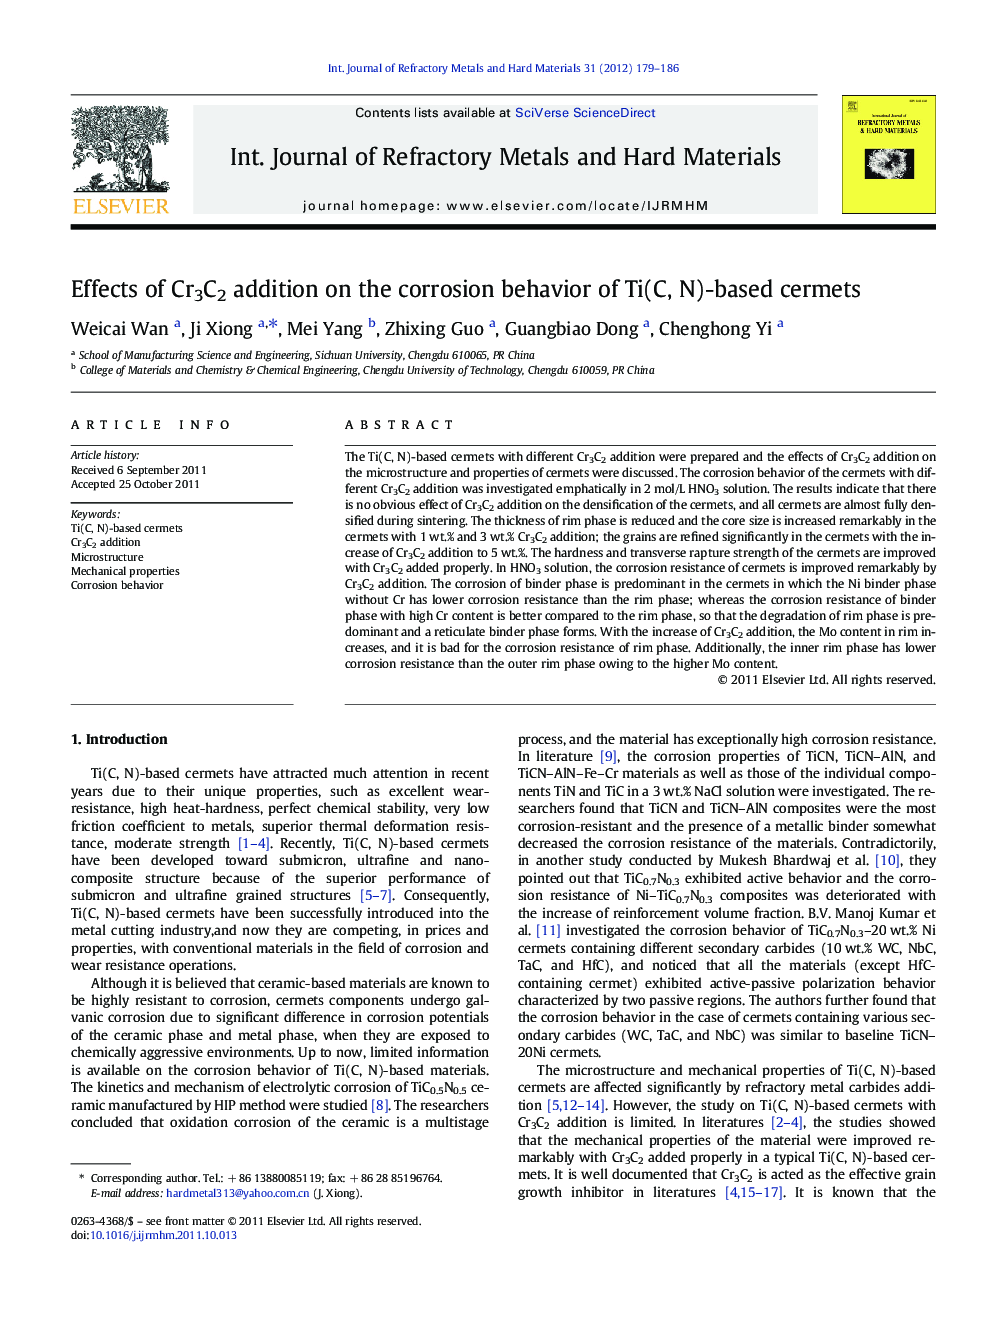 Effects of Cr3C2 addition on the corrosion behavior of Ti(C, N)-based cermets